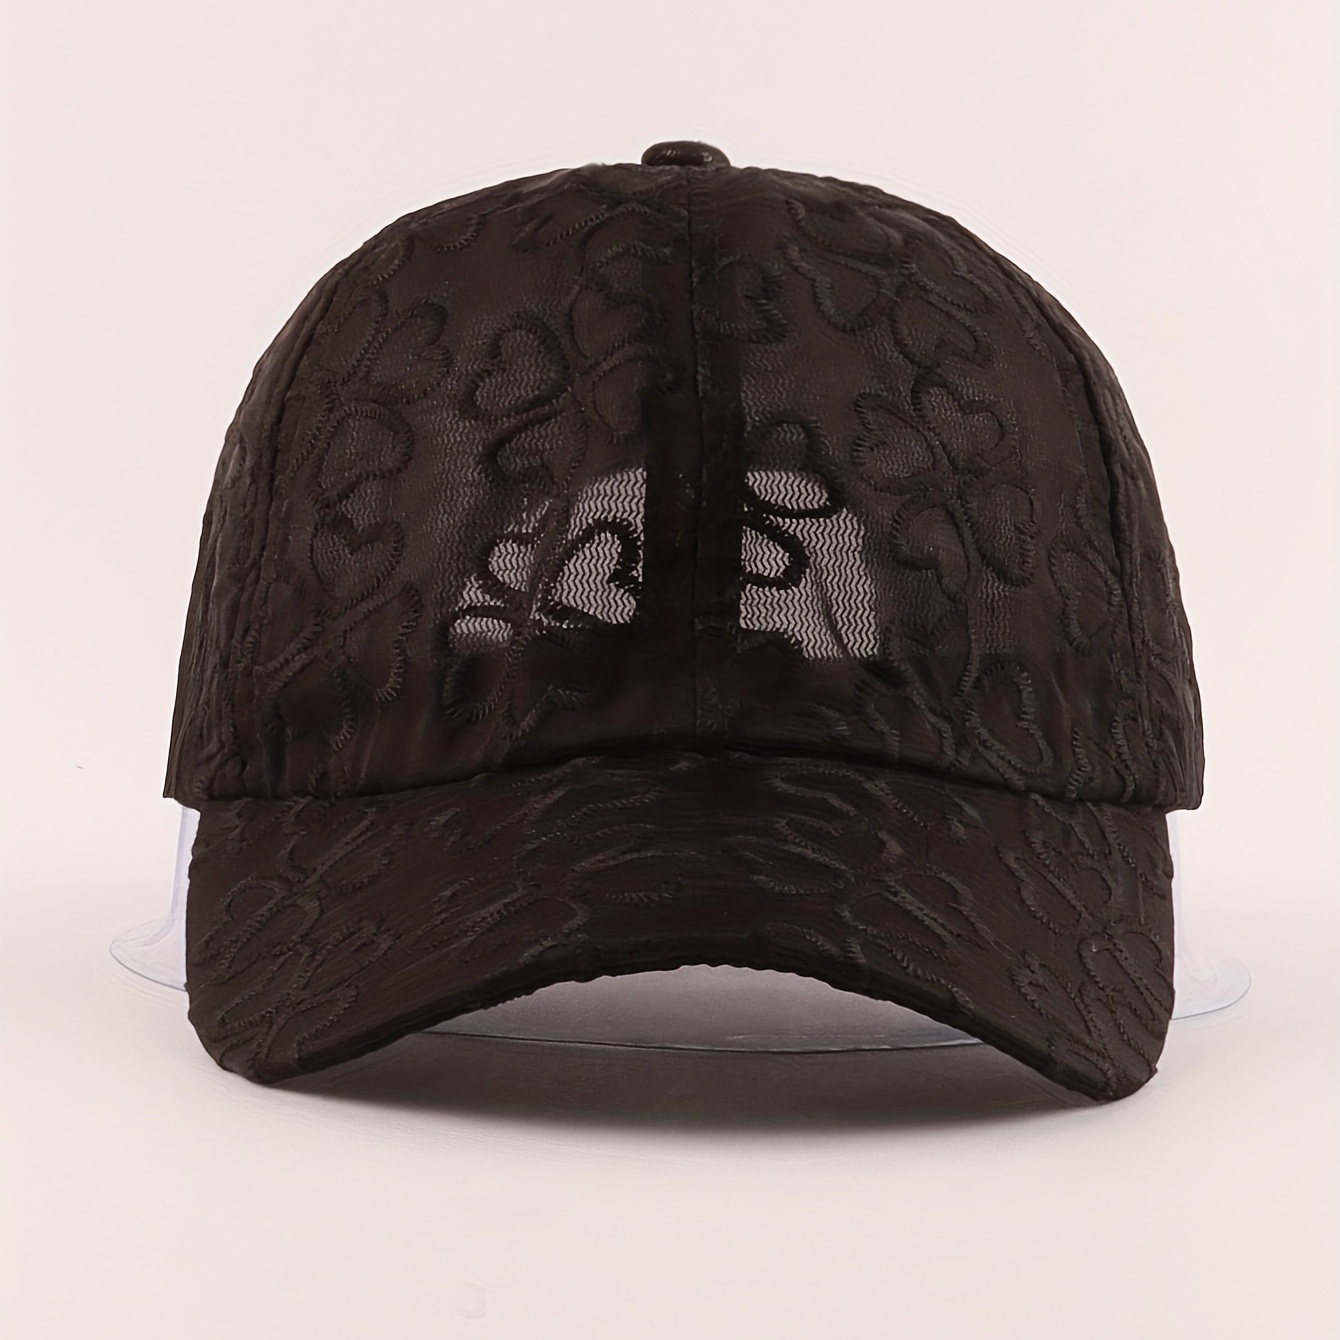 Summer Lace Hat Cotton Thin Baseball Cap for Women Breathable Mesh